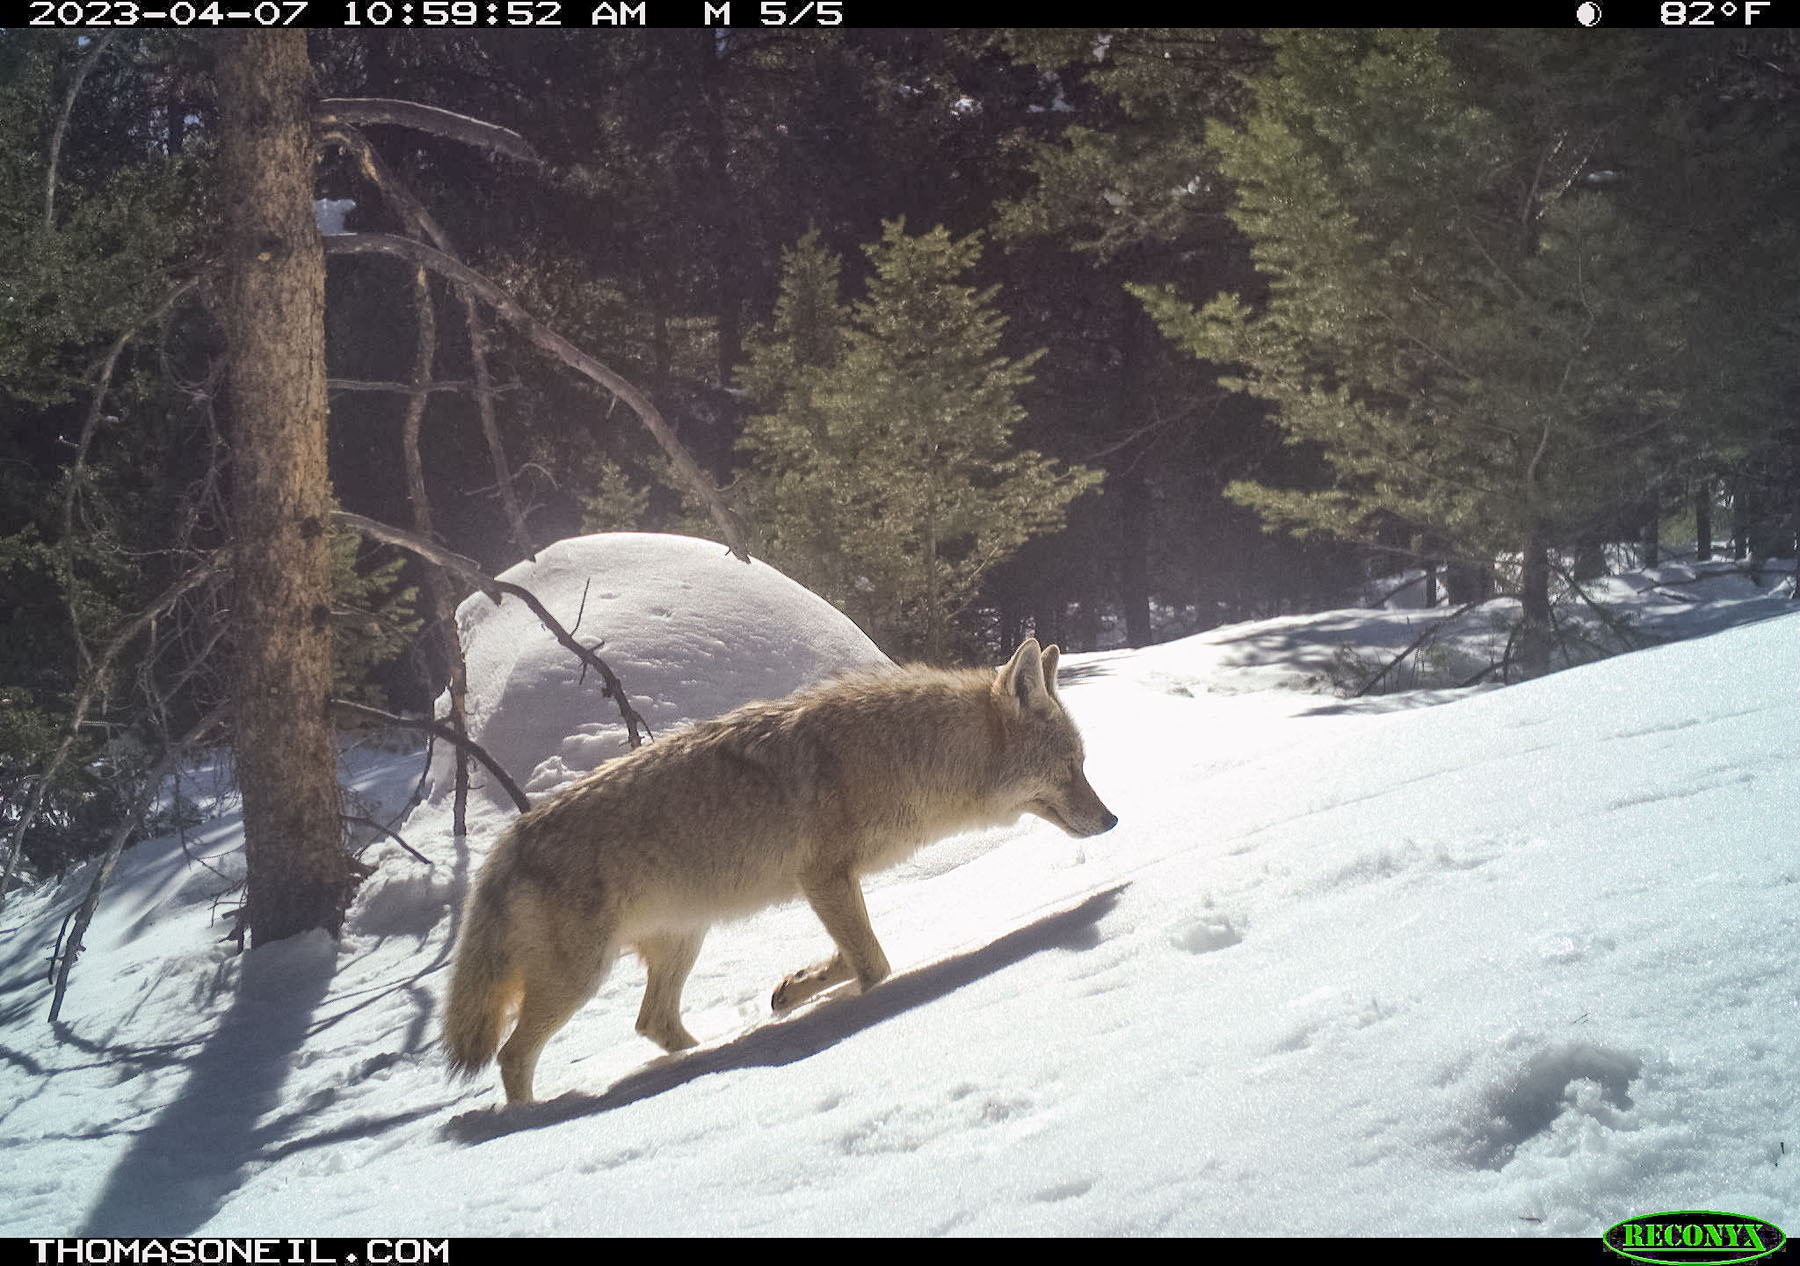 Coyote in nearby national forest.  Yes, different coyote than previous image, a little bigger.  Click for next photo.